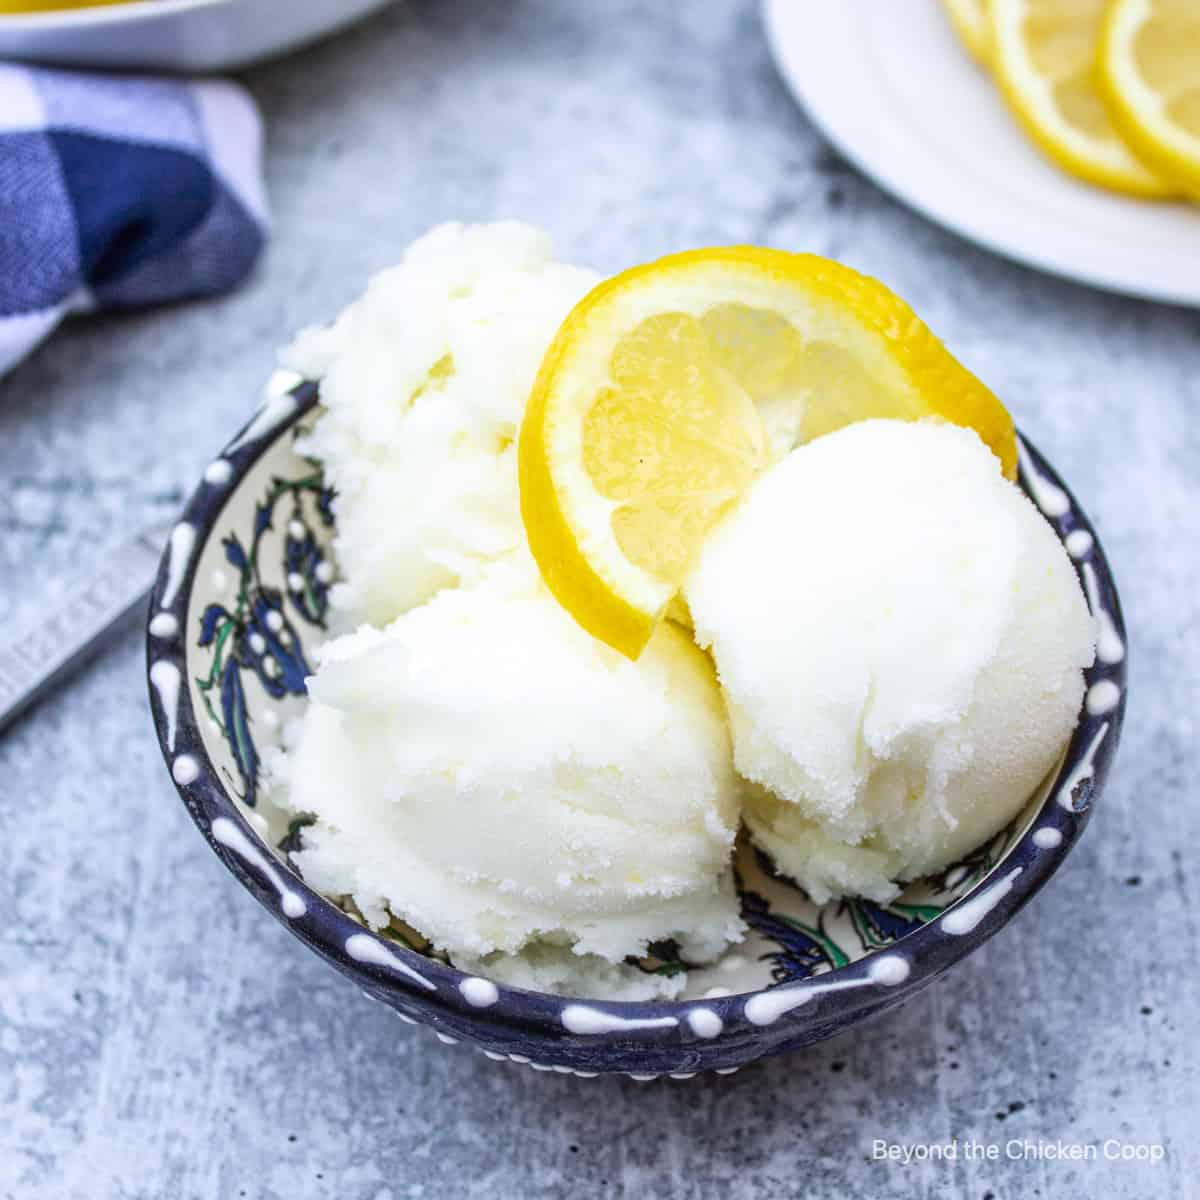 A blue bowl with scoops of lemon sorbet.